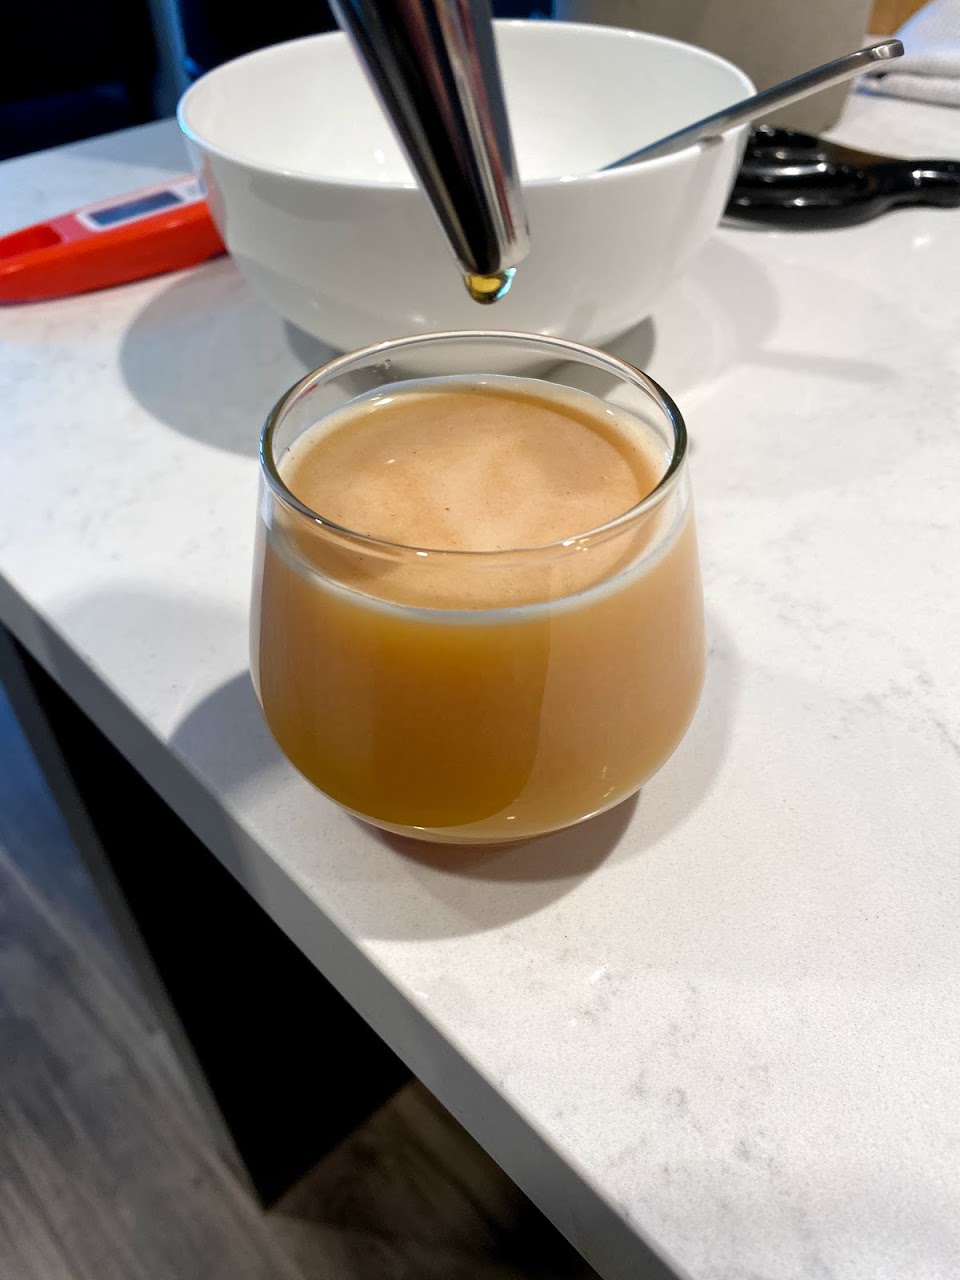 Tea properly dispensed from a nitro faucet